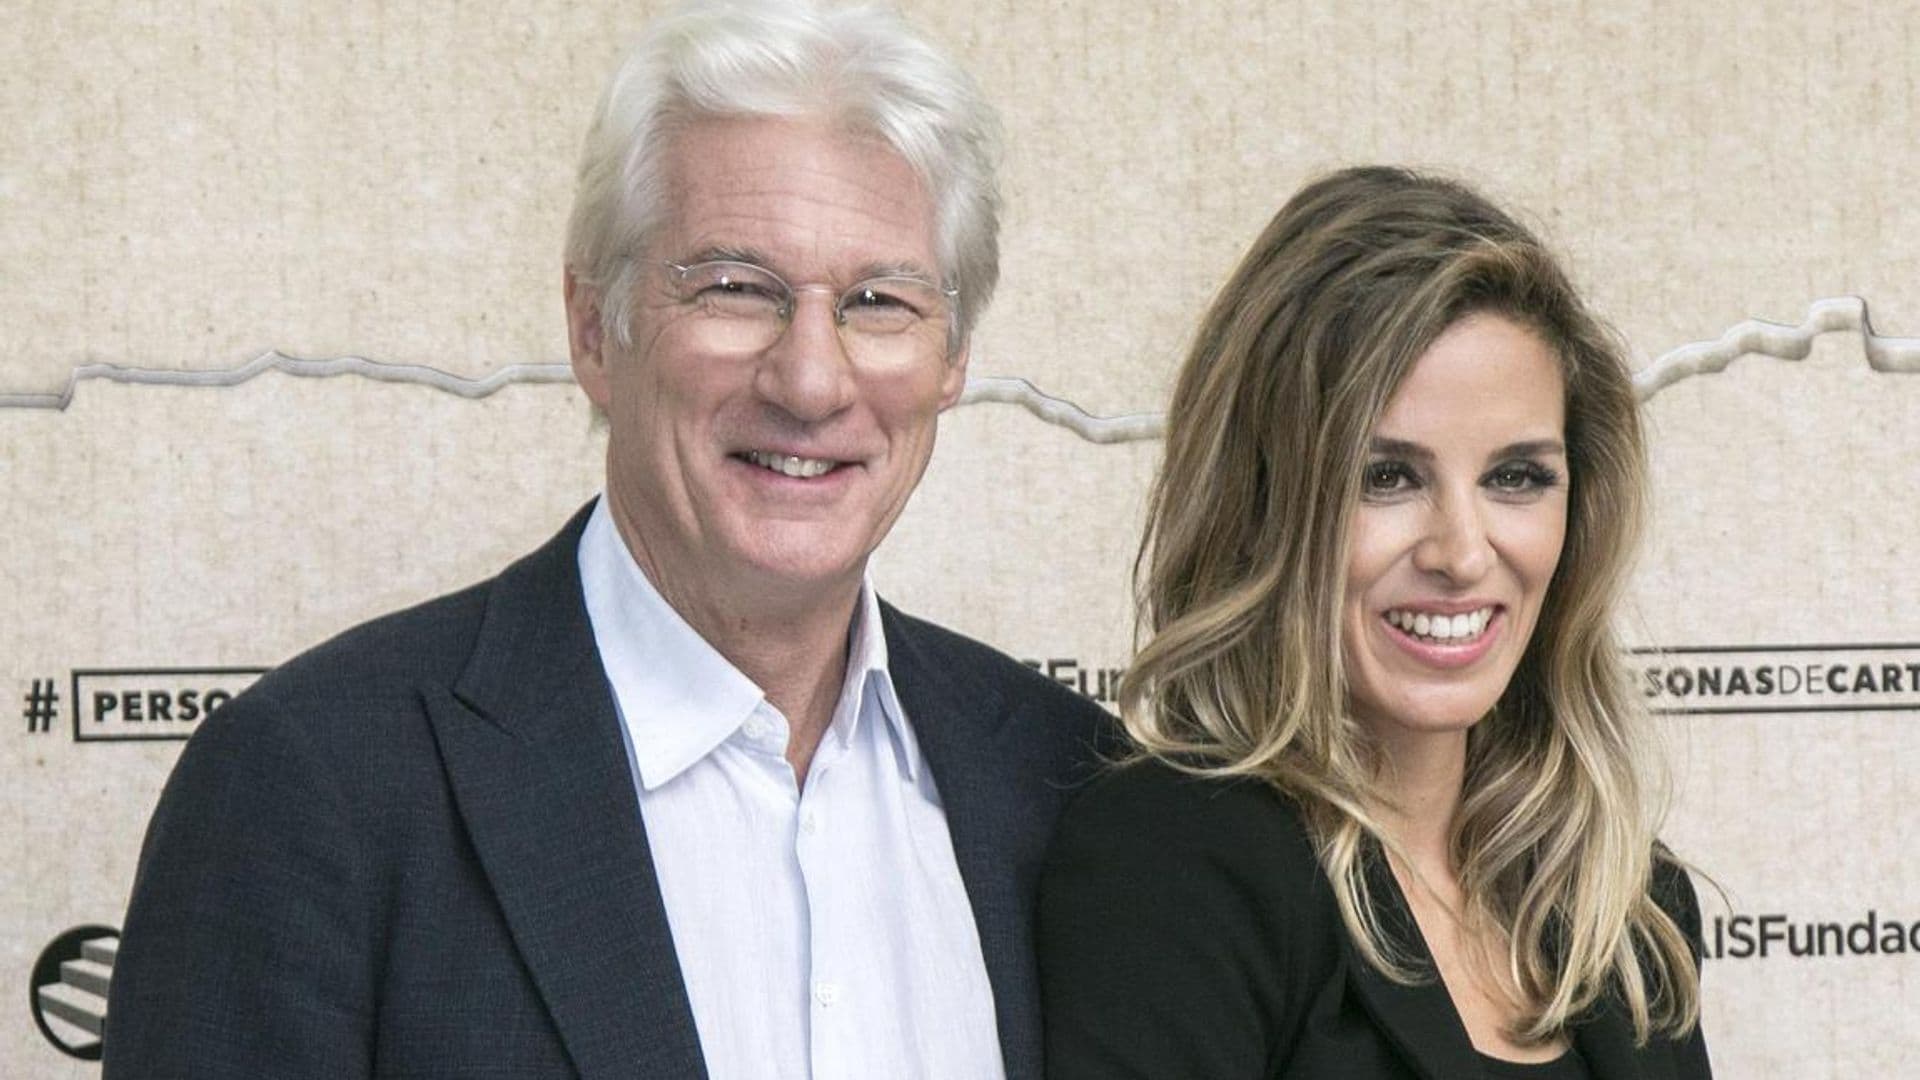 Richard Gere and wife Alejandra Silva expecting second child nine months after birth of first child